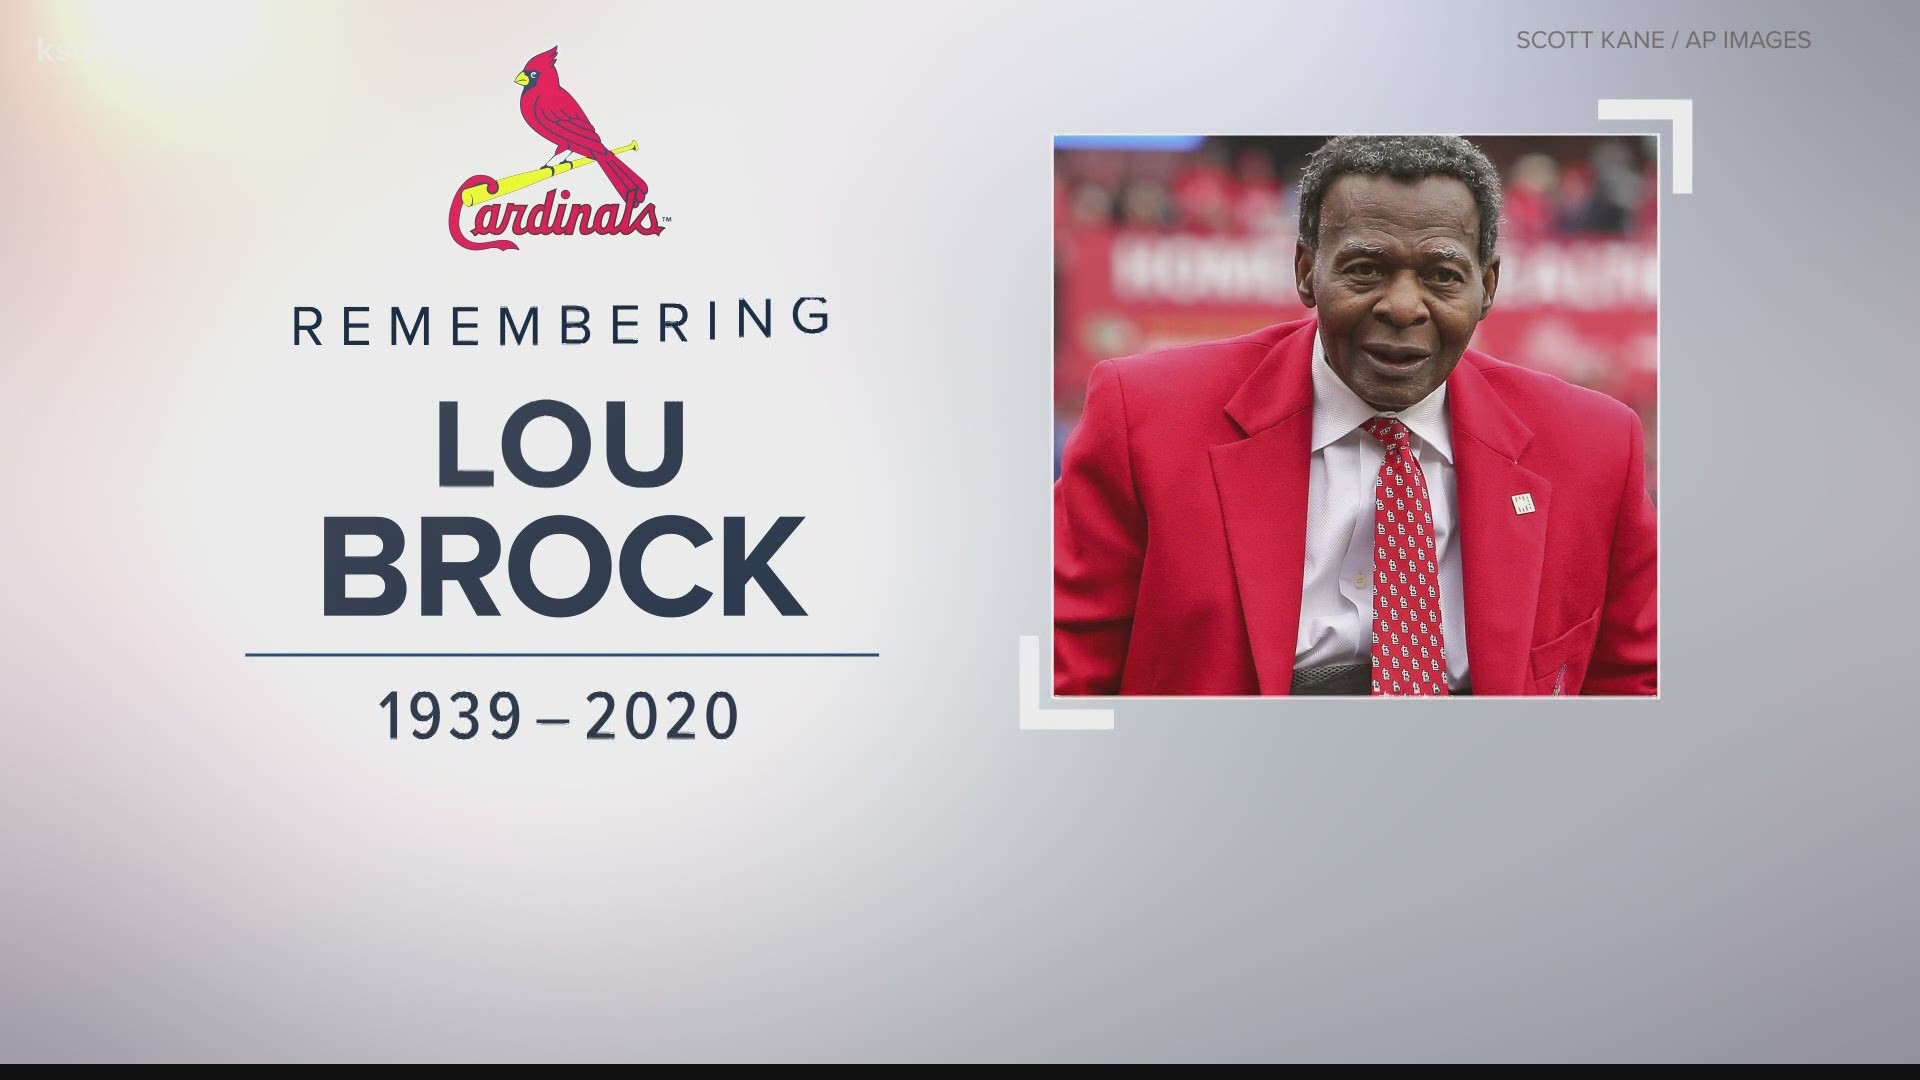 Statement from Lou Brock Jr.